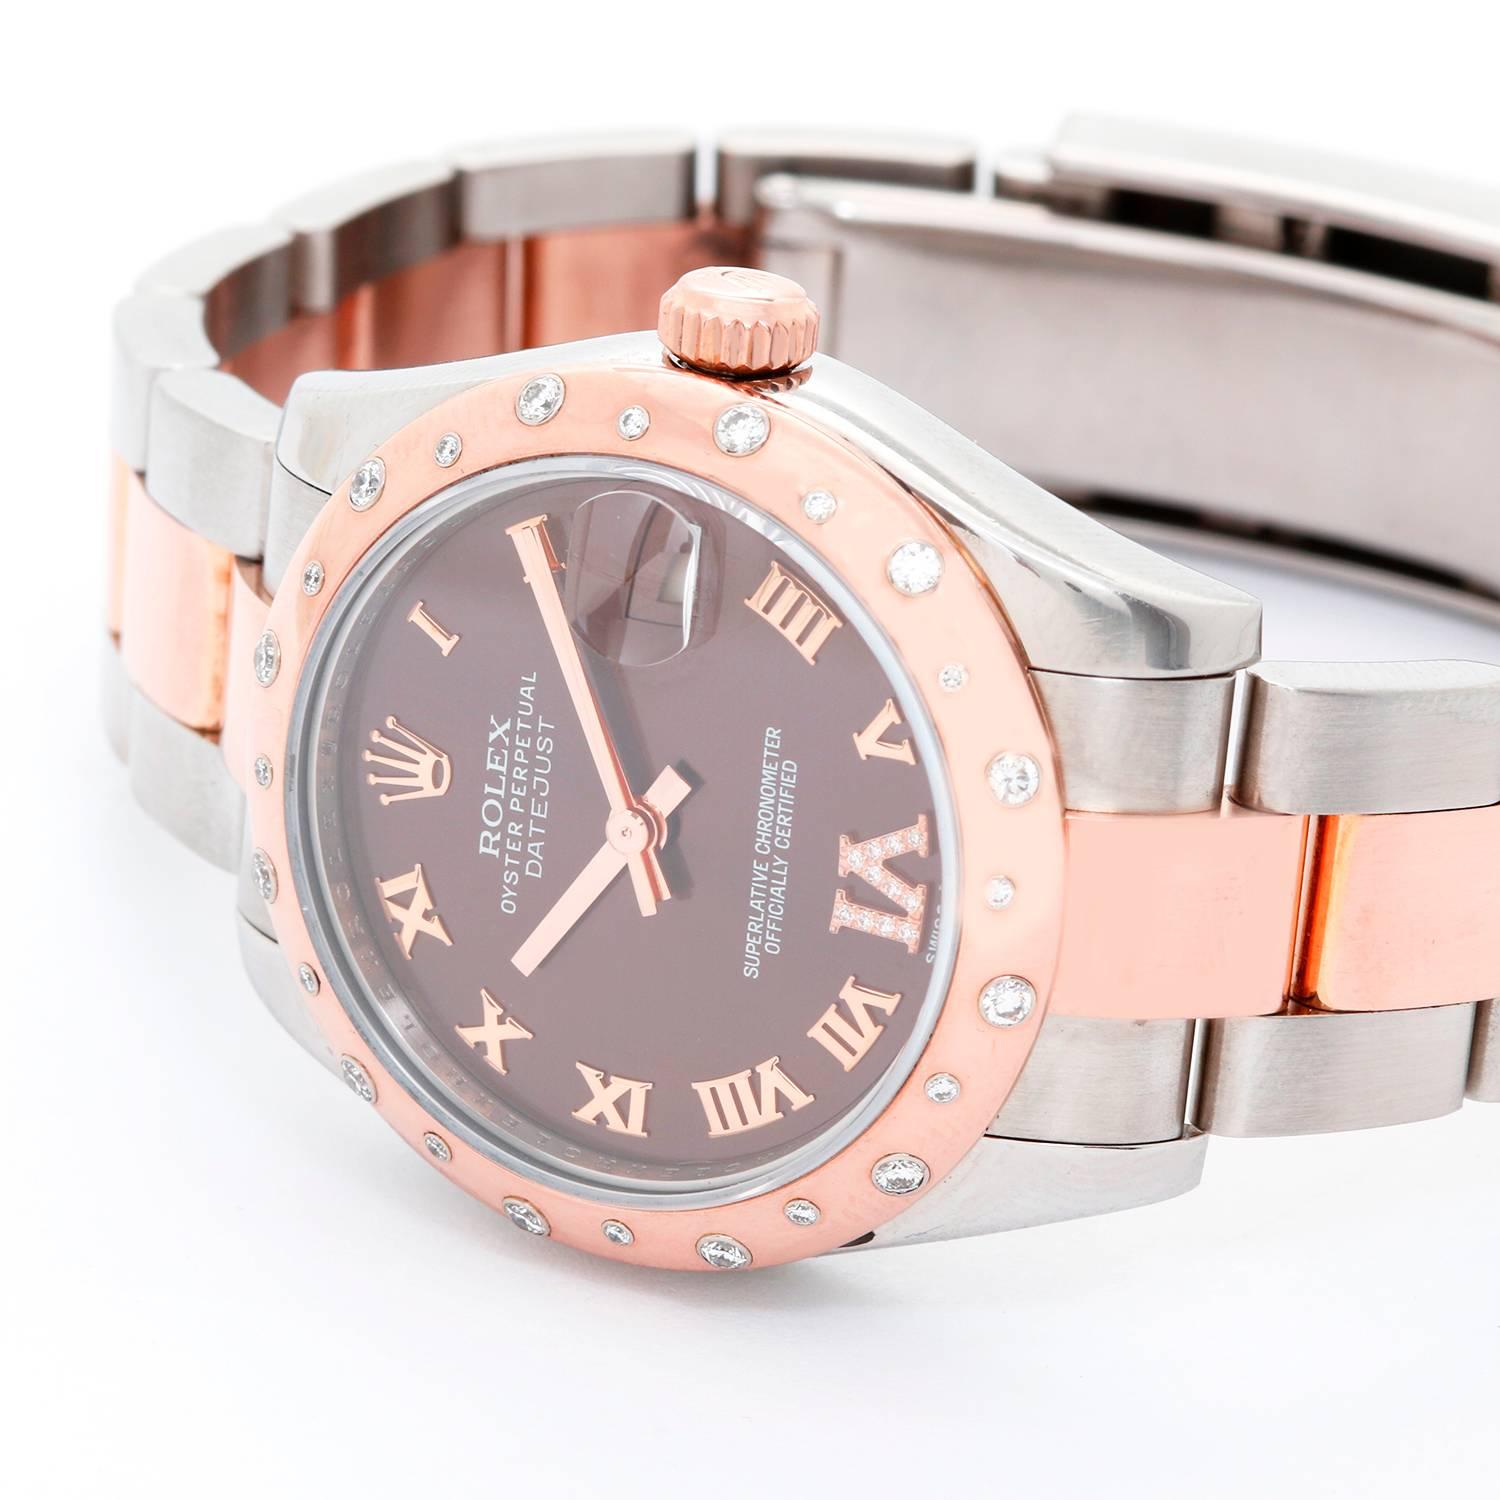 Rolex Everose Steel, Rose Gold, Diamond Ladies Midsize 31mm Datejust Watch 178341 -  Automatic winding. Stainless steel case with 18k rose gold and 24 diamond bezel (31mm diameter). Chocolate brown dial with rose gold Roman numerals and diamonds at